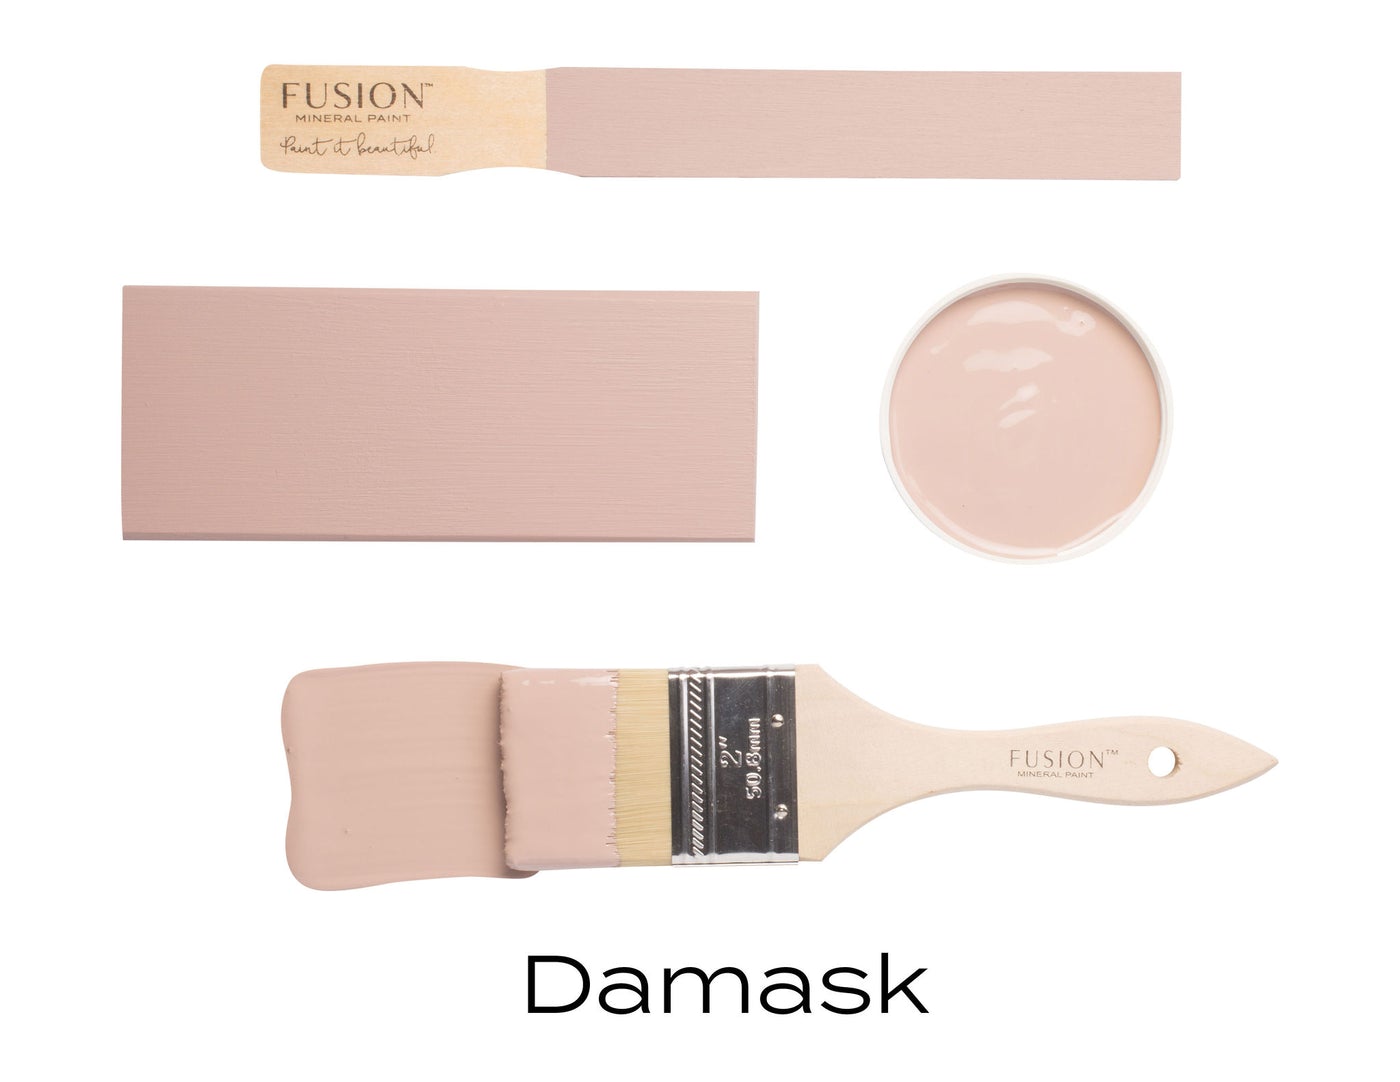 DAMASK - FUSION MINERAL PAINT